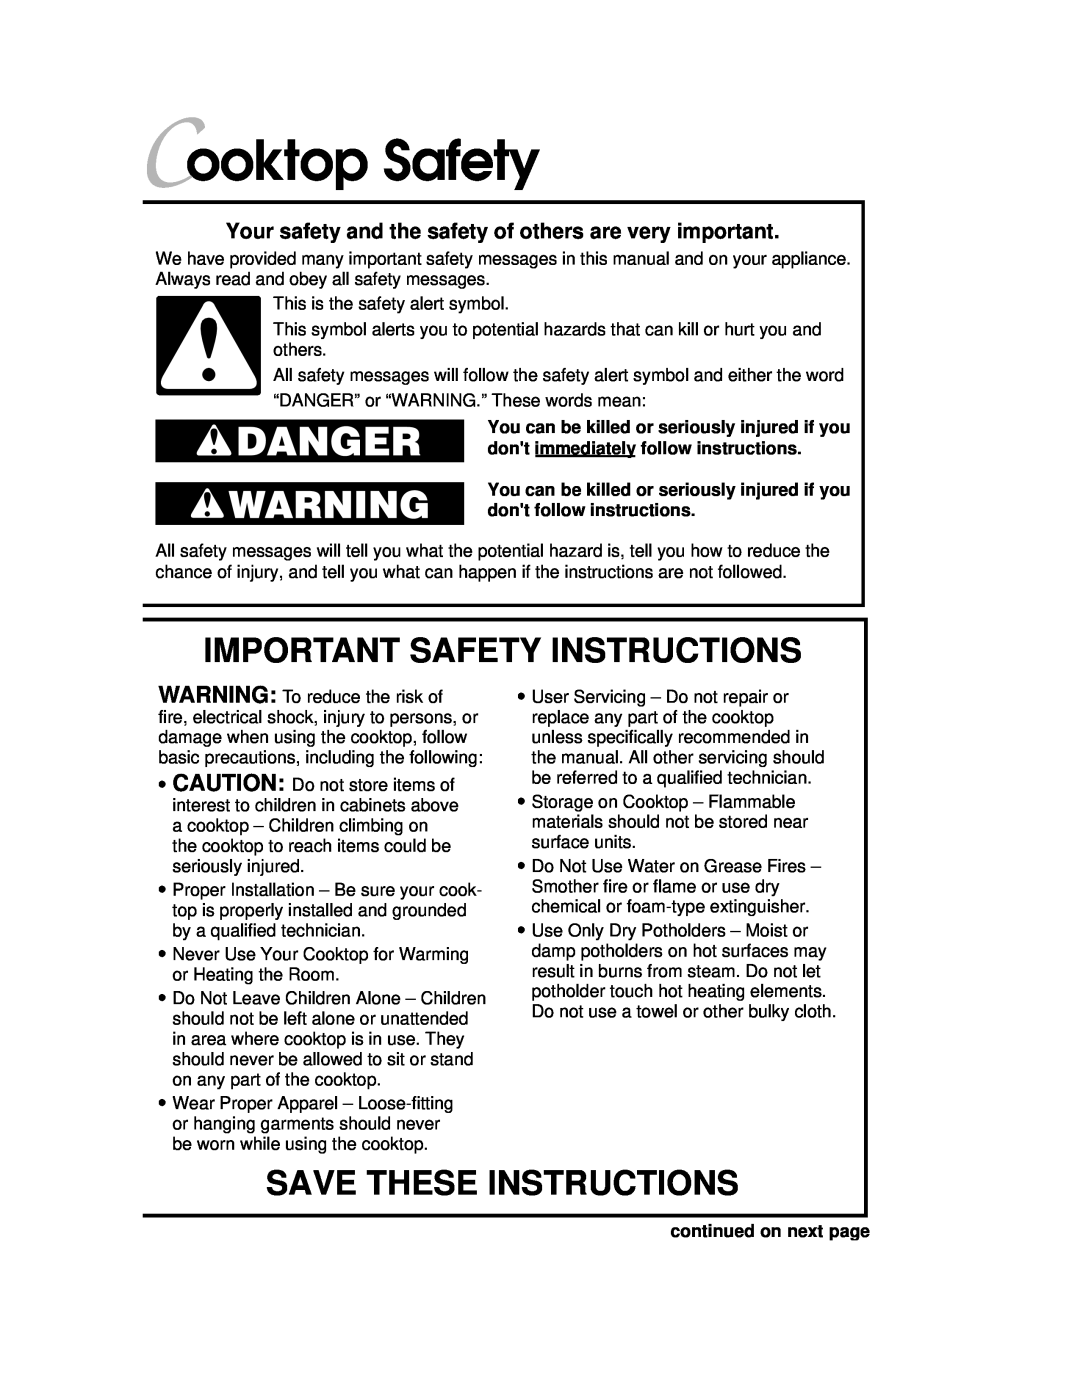 KitchenAid YKECC508G Cooktop Safety, Important Safety Instructions, Save These Instructions, continued on next page 